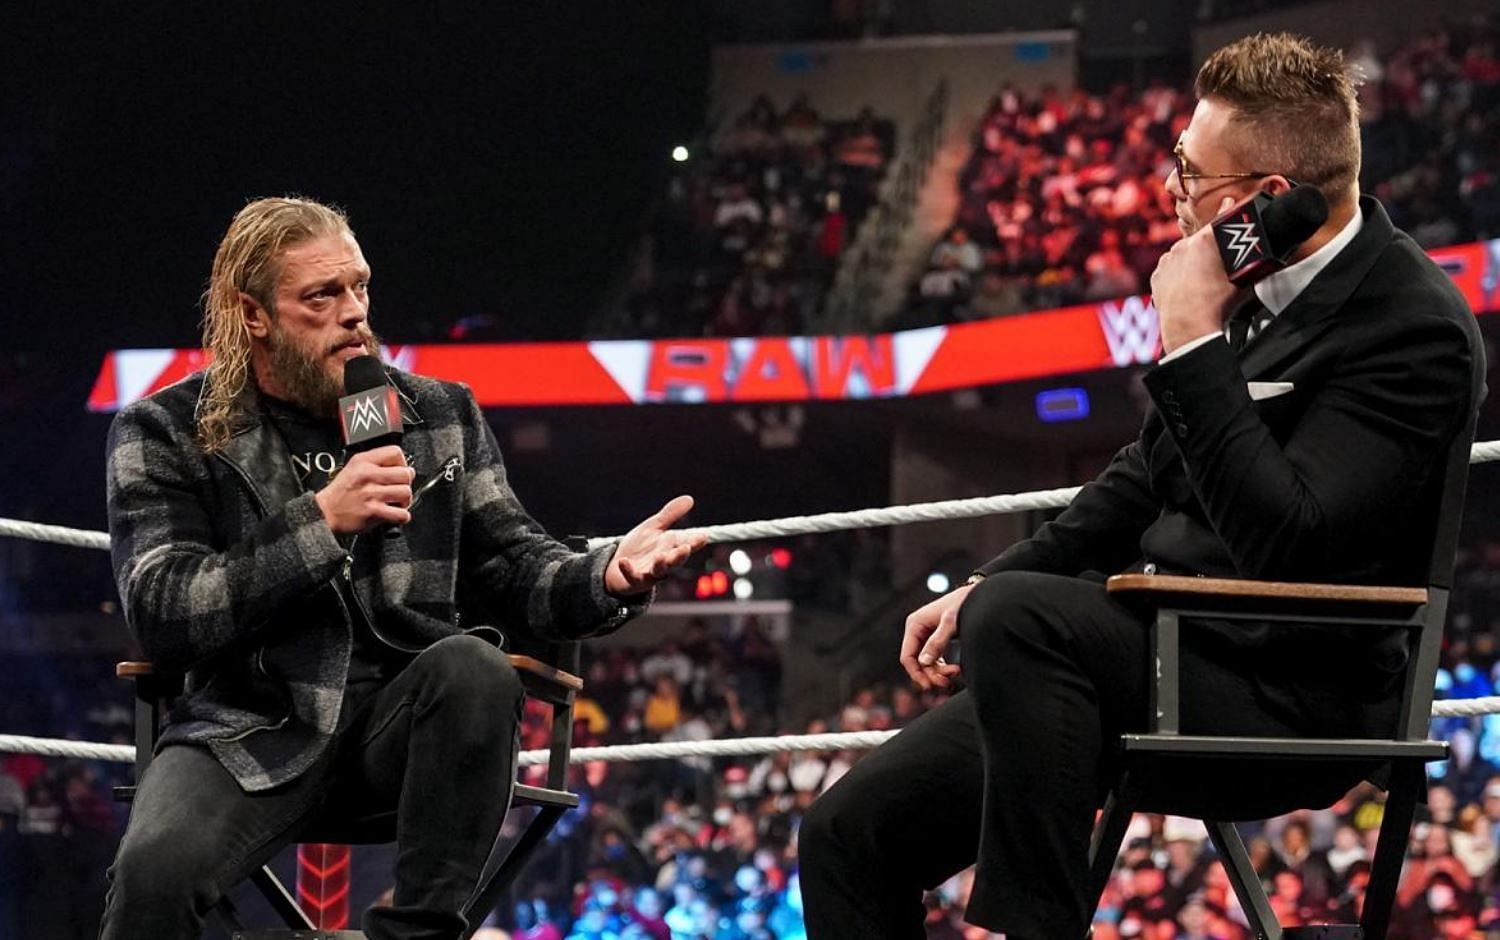 The Miz invited Edge to be a part of Miz TV this week on RAW